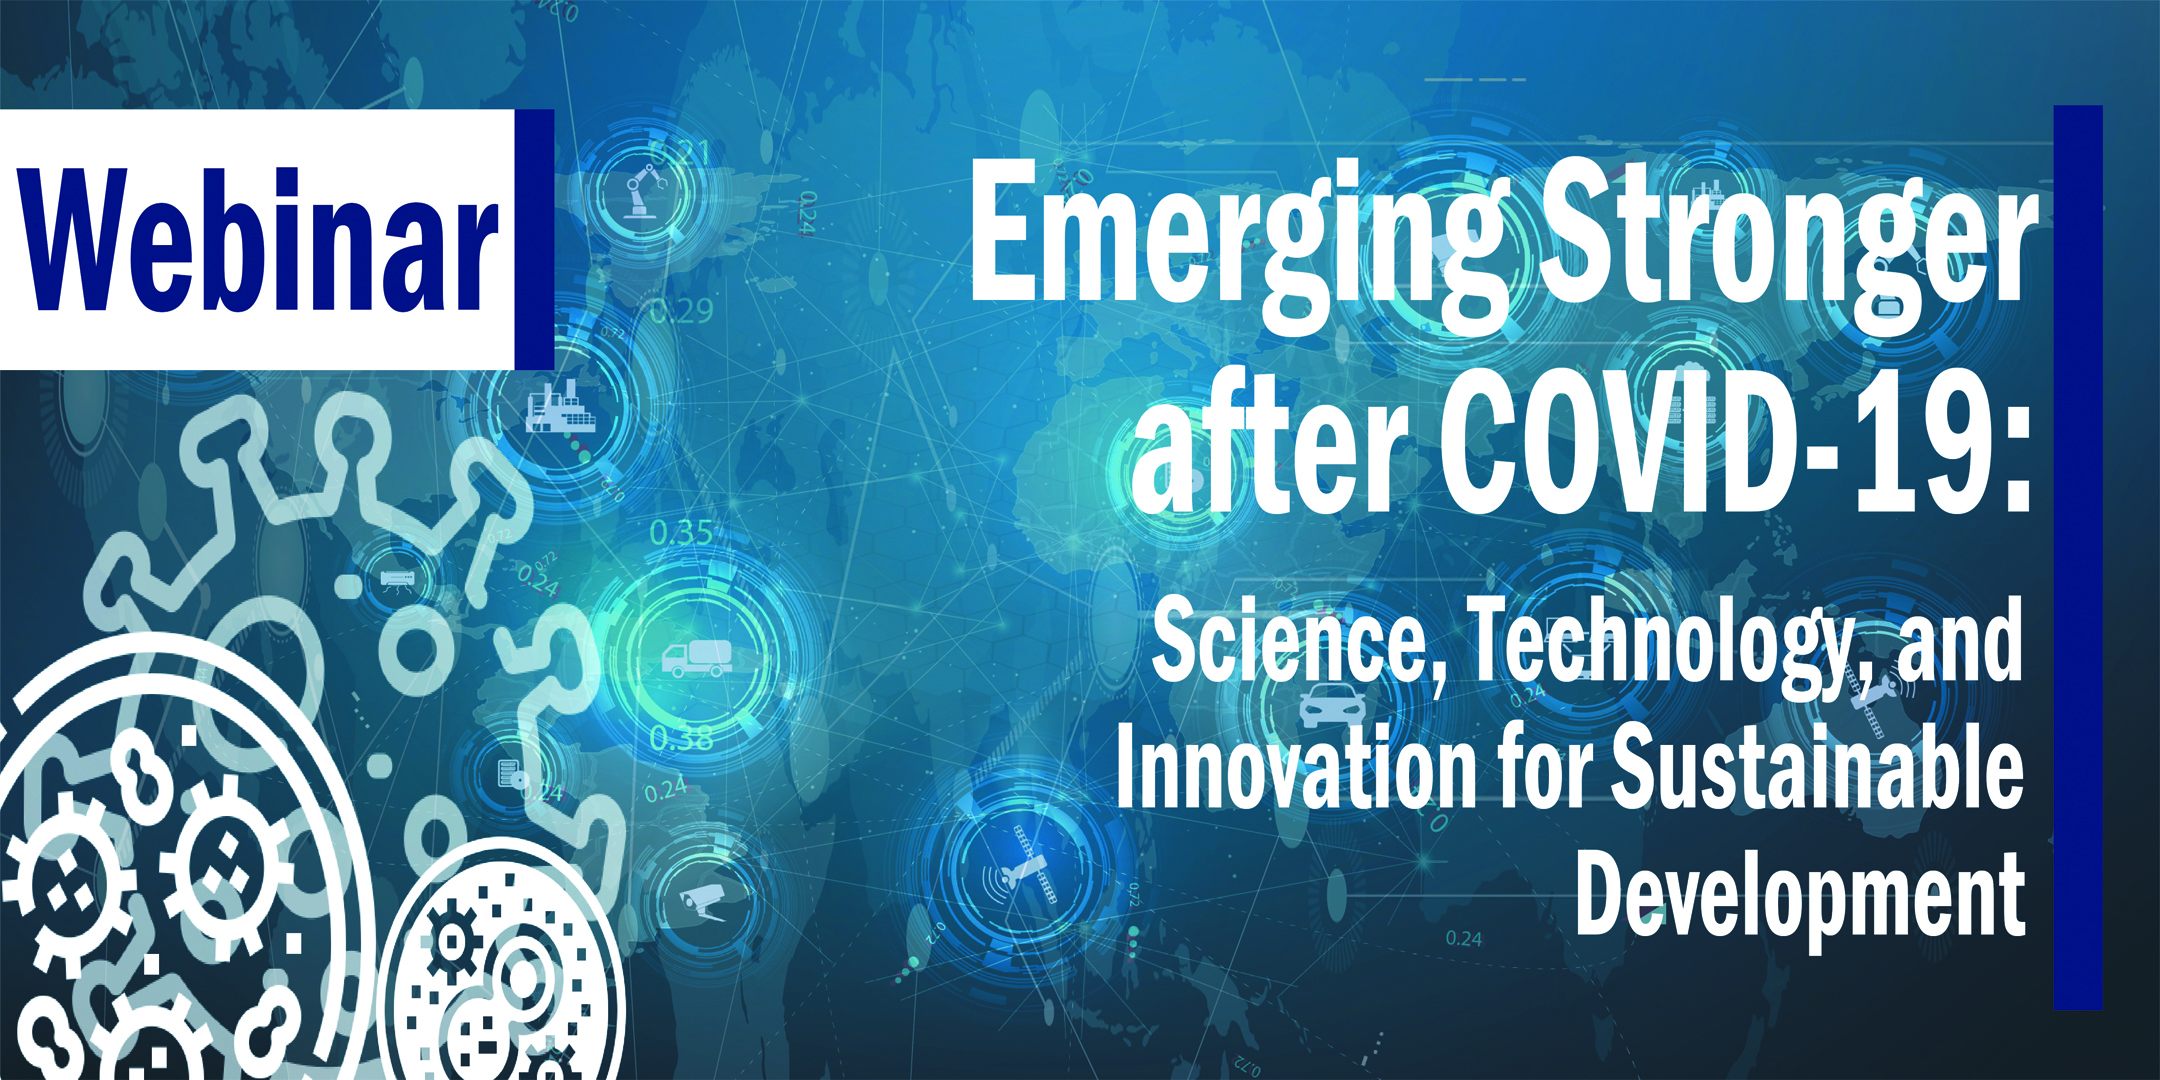 TaiwanICDF 2020 United Nations High-Level Political Forum Side Event Webinar -- Emerging Stronger after COVID-19: Science, Technology, and Innovation for Sustainable Development